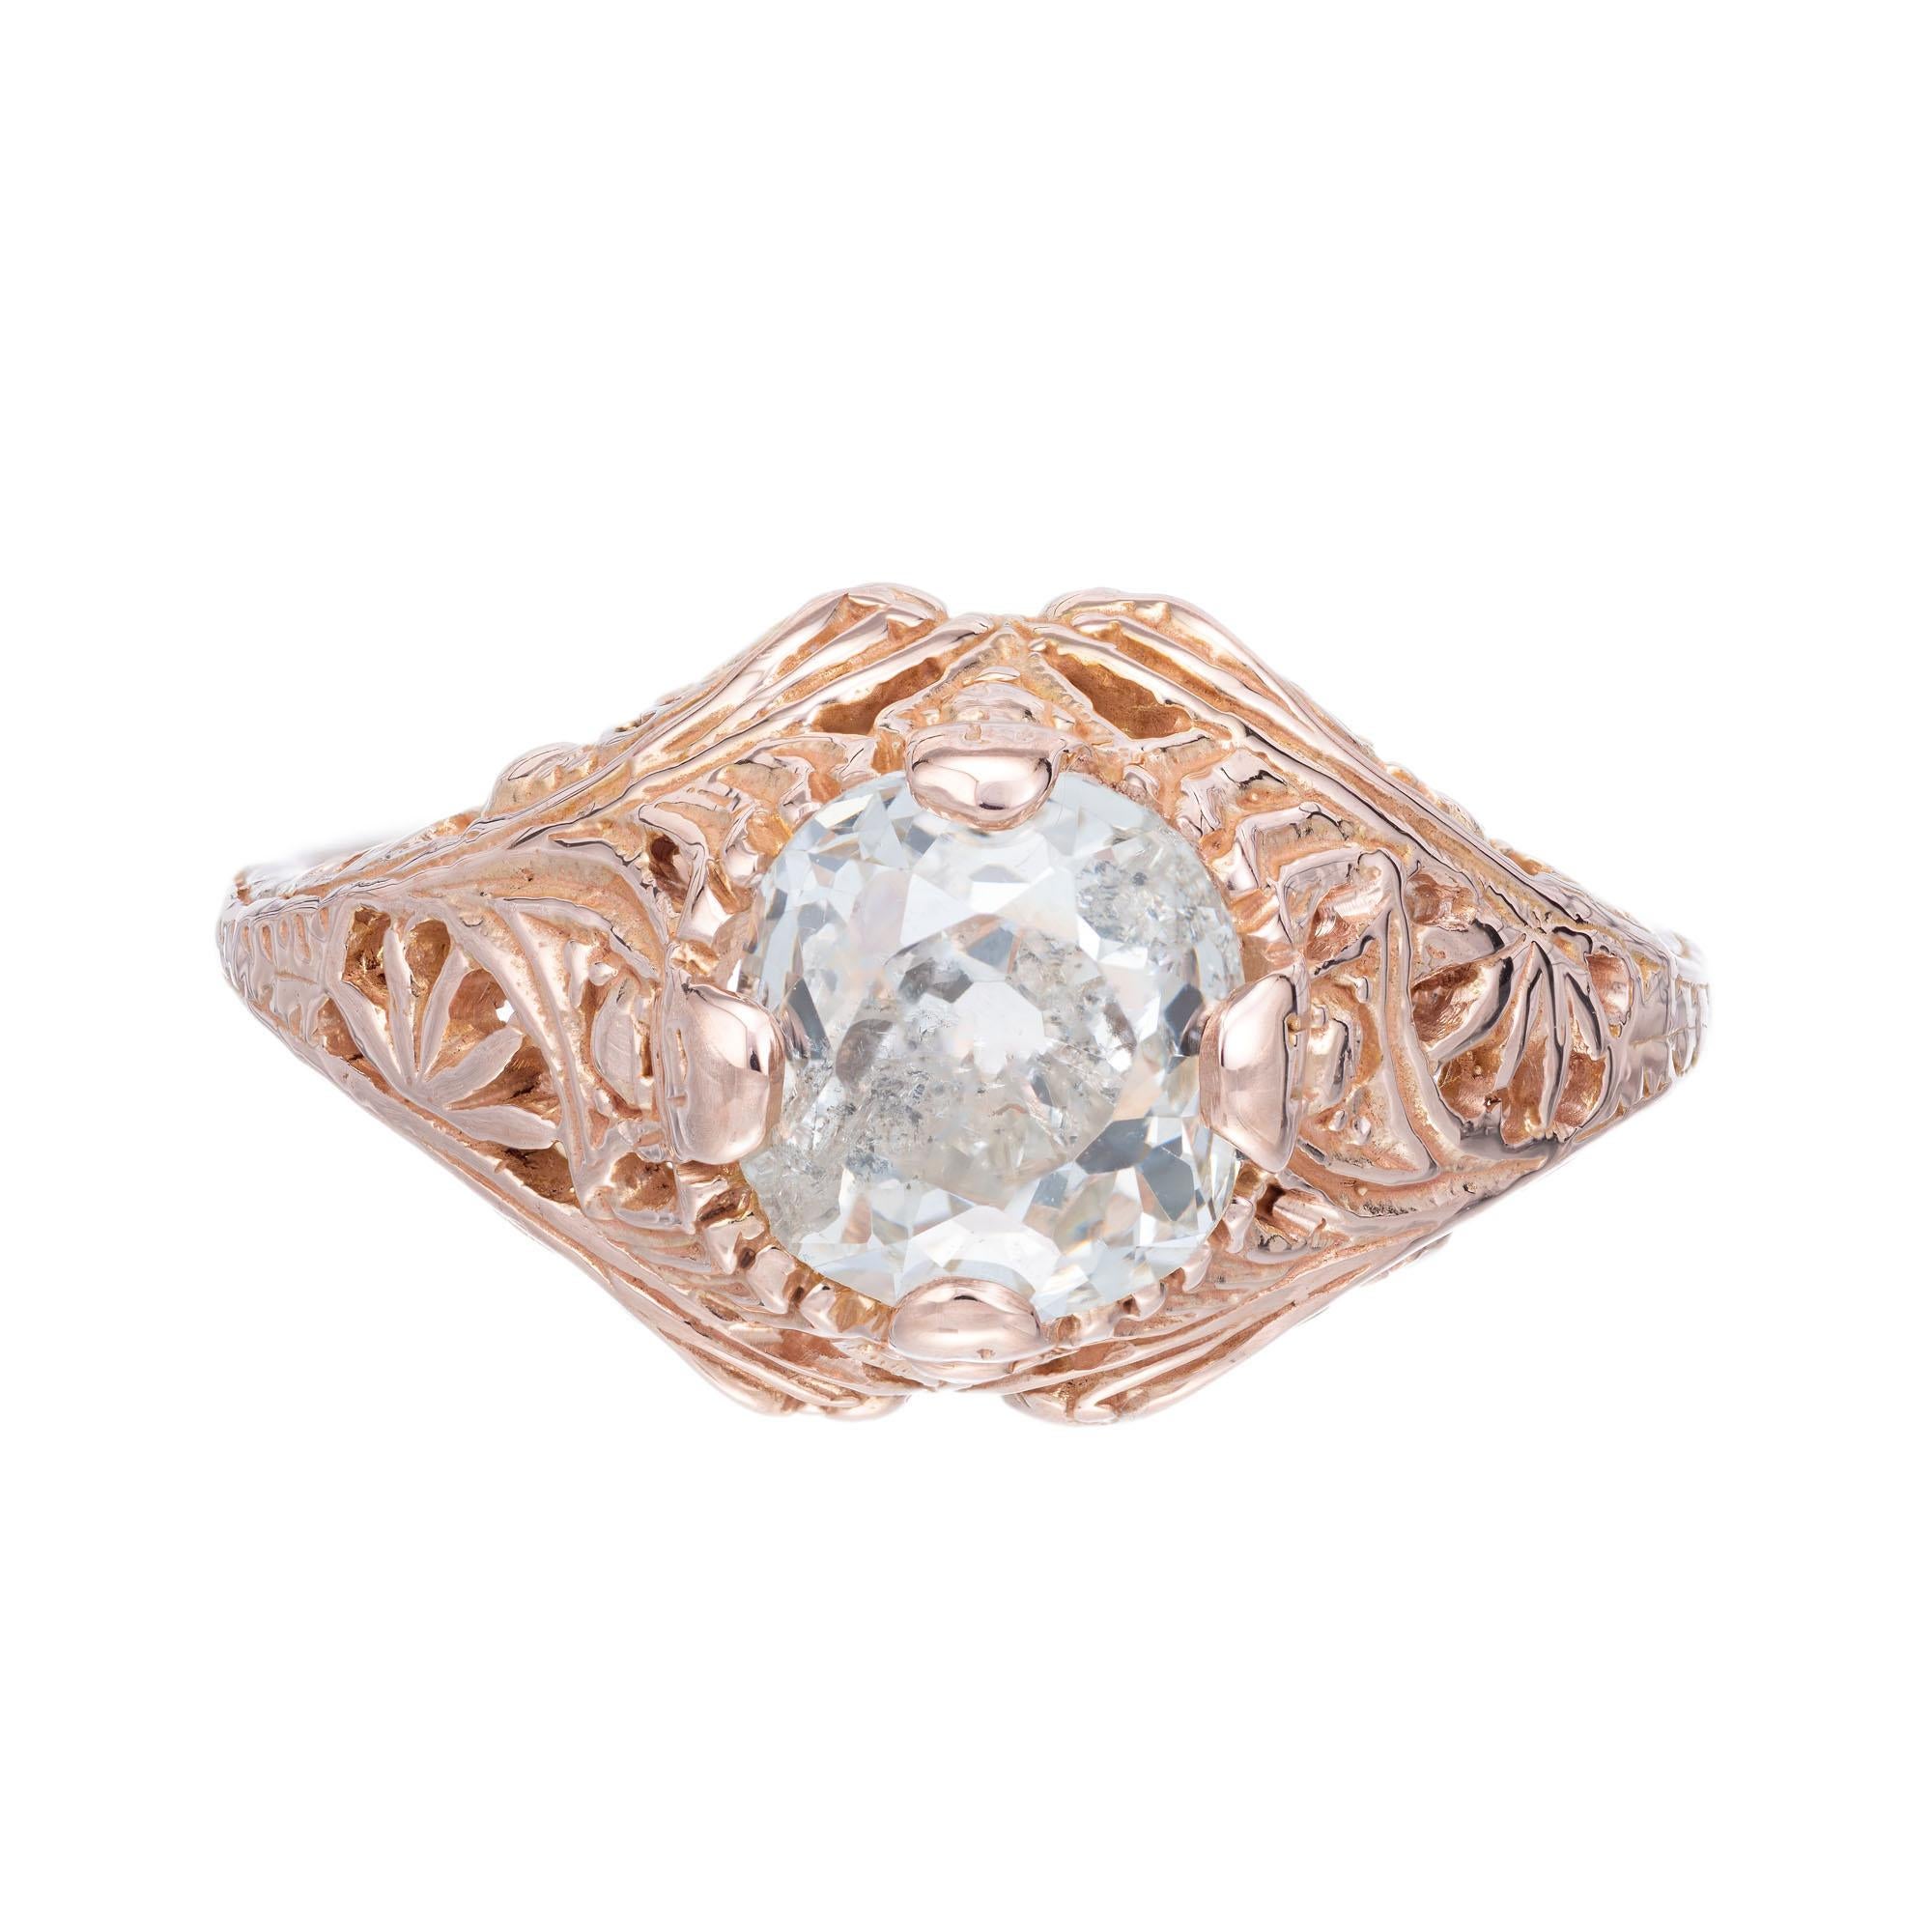 Original Antique 1890's old mine brilliant cut diamond engagement ring in its original rose gold filigree setting. GIA certified center stone. 

1 old mine brilliant cut diamond M, I2, approx. 1.63cts GIA Certificate # 5182184645
Size 7.5 and